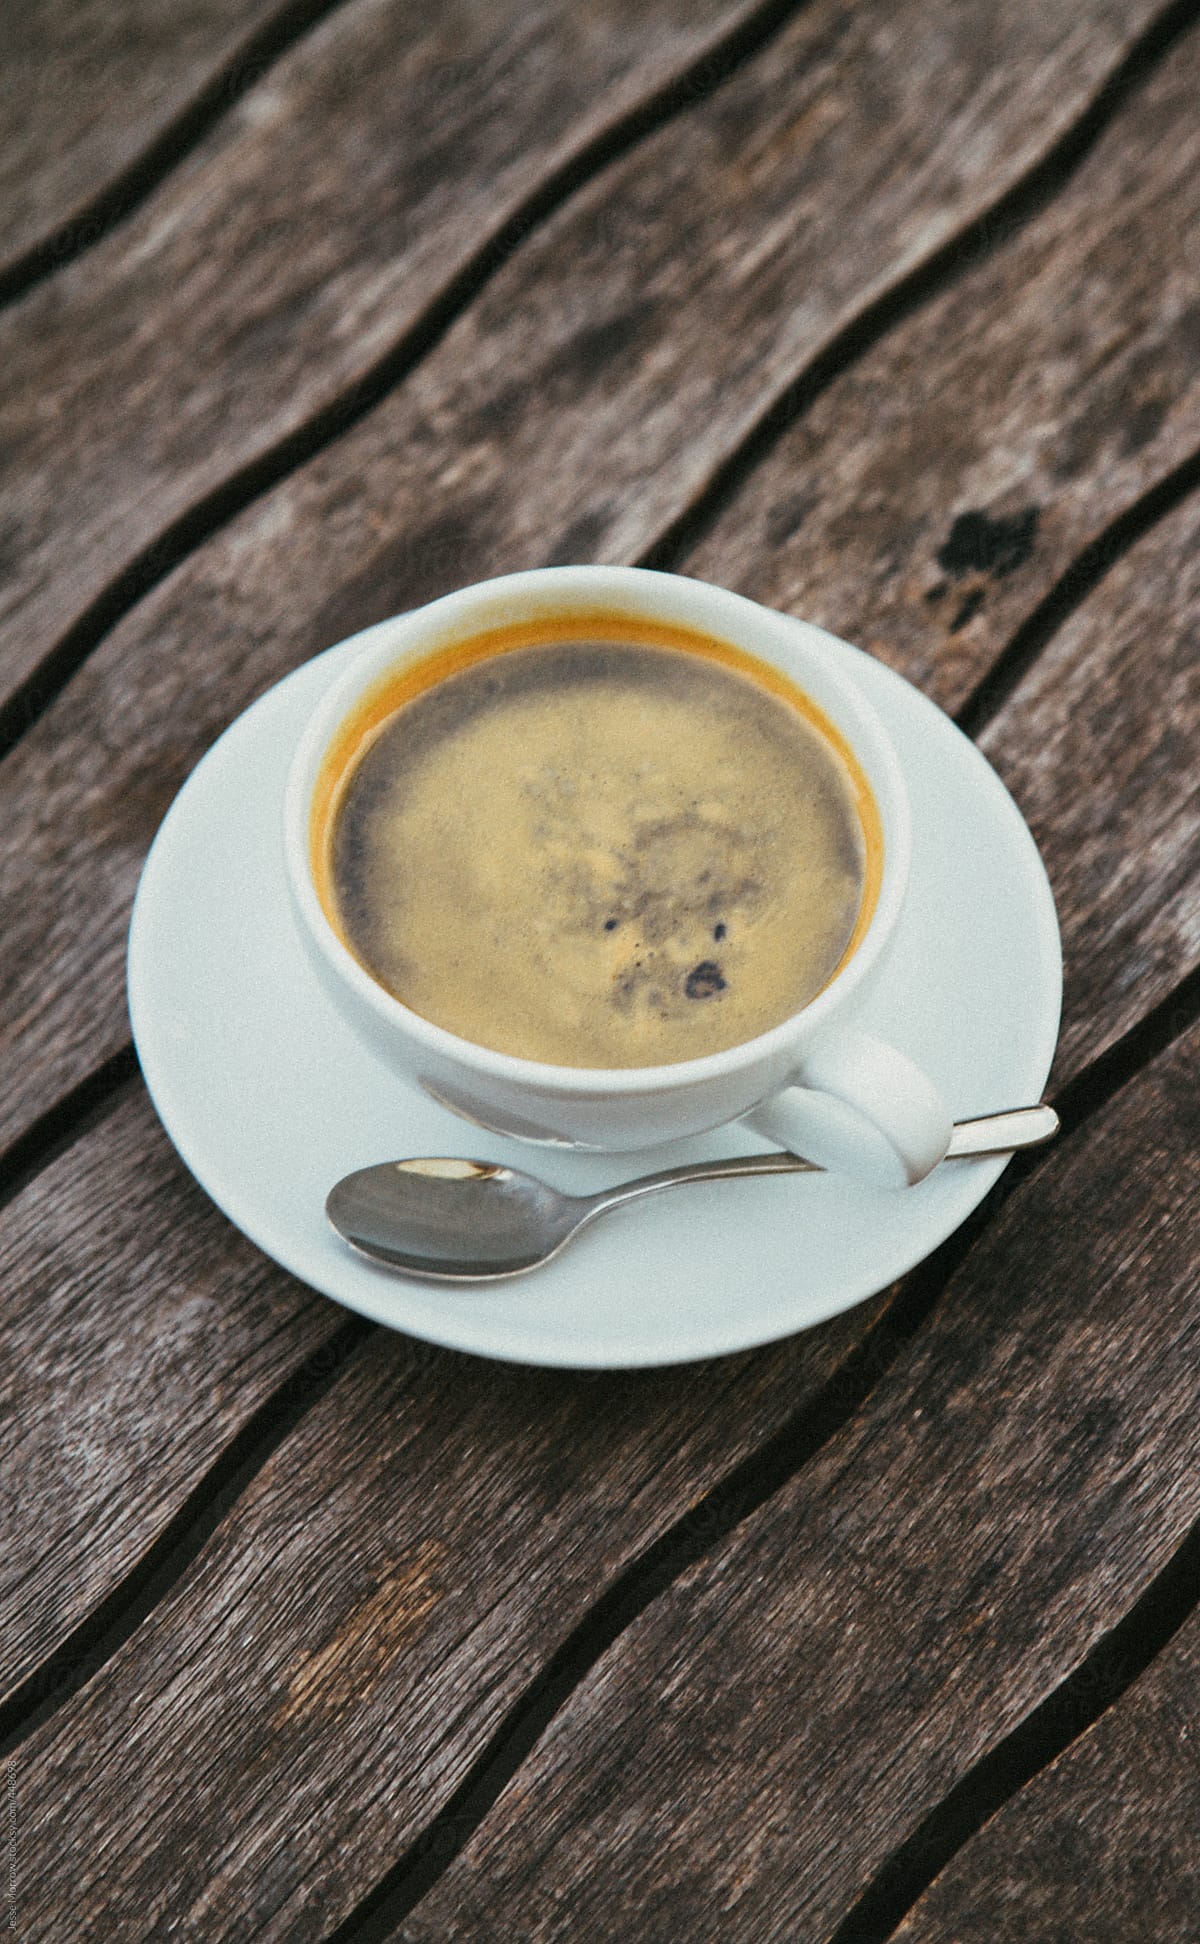 Coffee in white mug and saucer on old wooden table